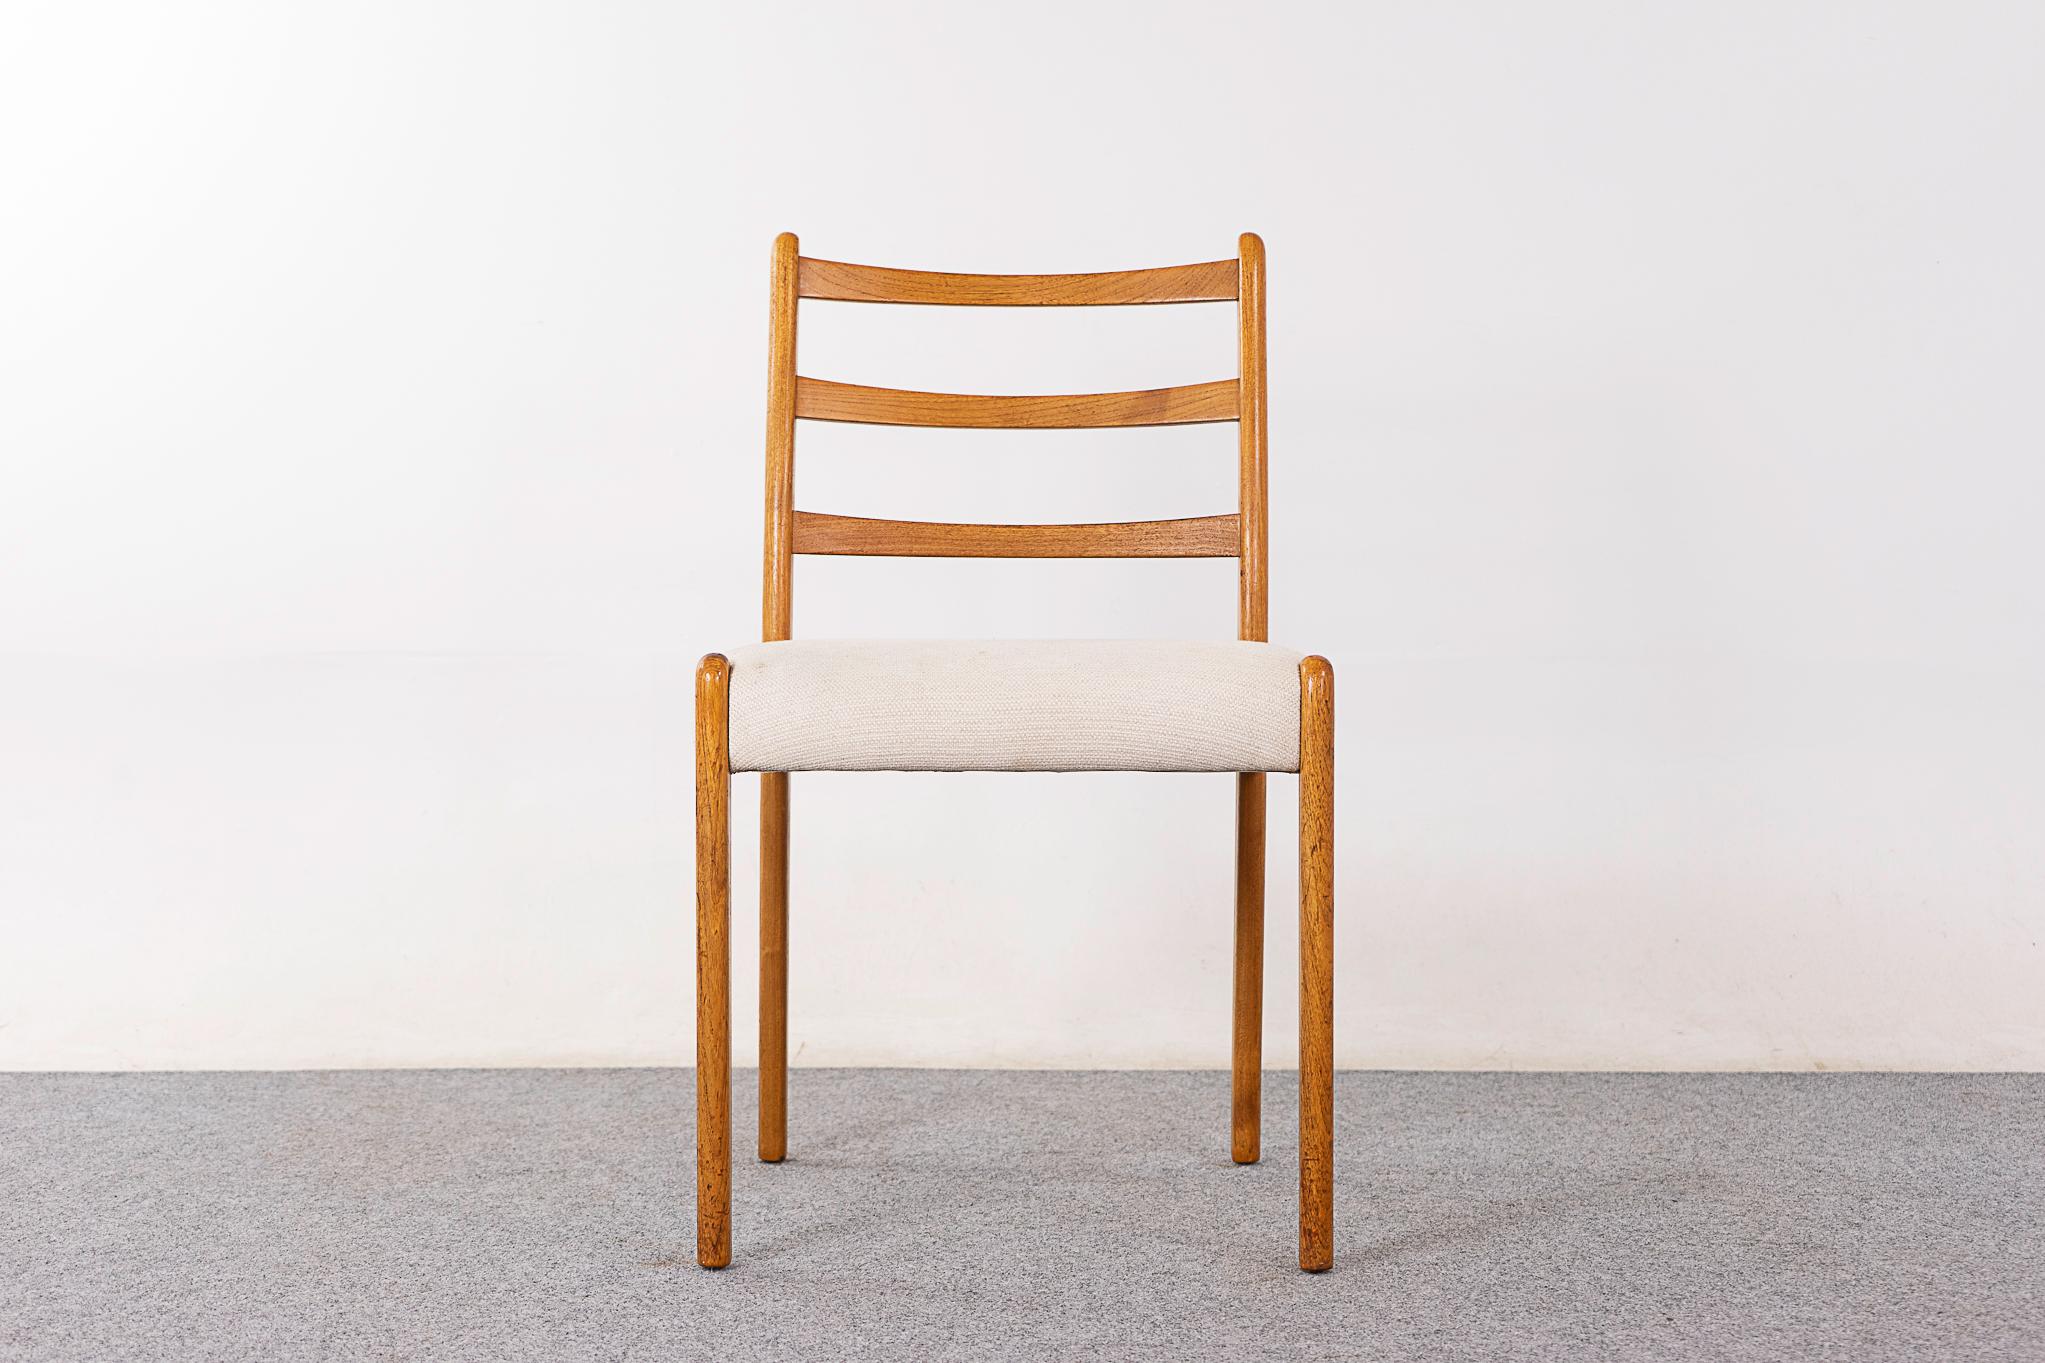 Teak mid-century dining chair, circa 1960's. Beautifully slatted backrests and generous seat.

Unrestored item with option to purchase in restored condition for an additional $100 USD. Restoration includes: repairs, sanding, staining and an oil